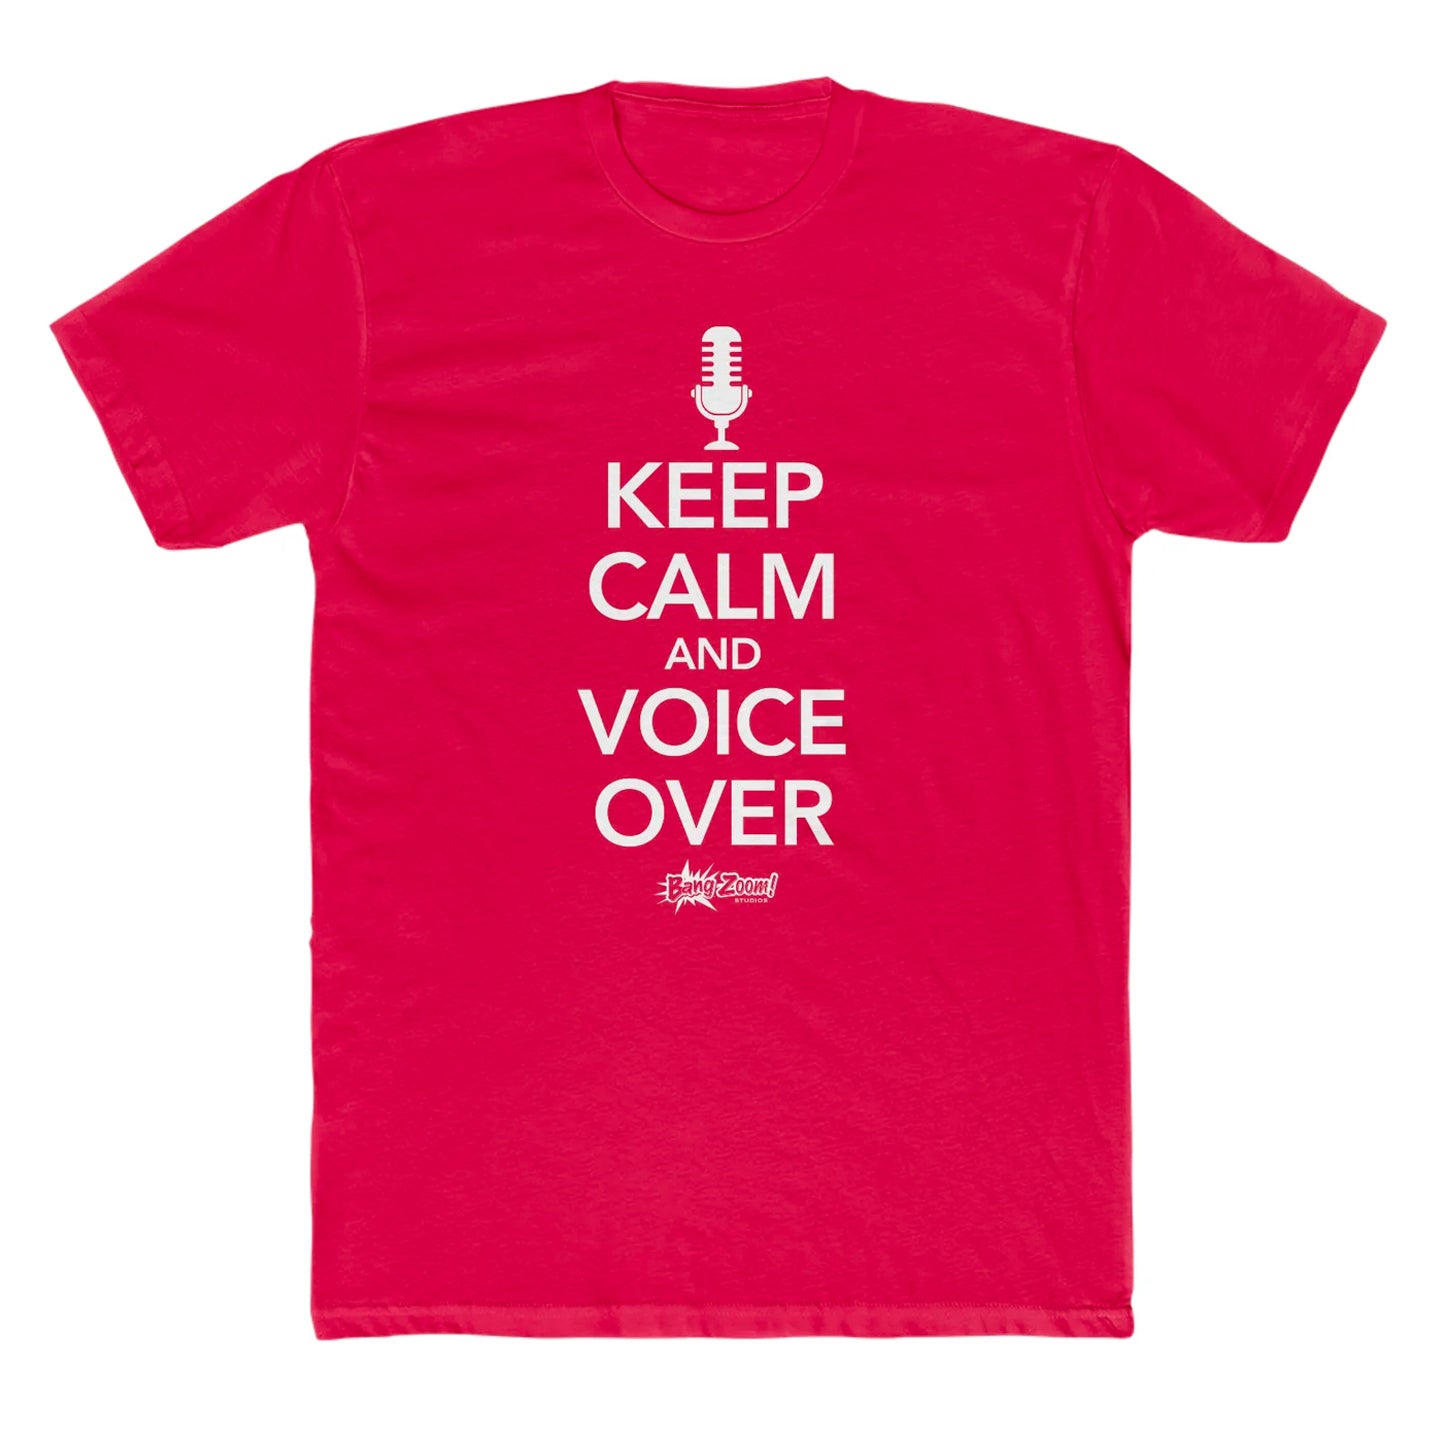 Unisex "Keep Calm and Voice Over" Red Tee